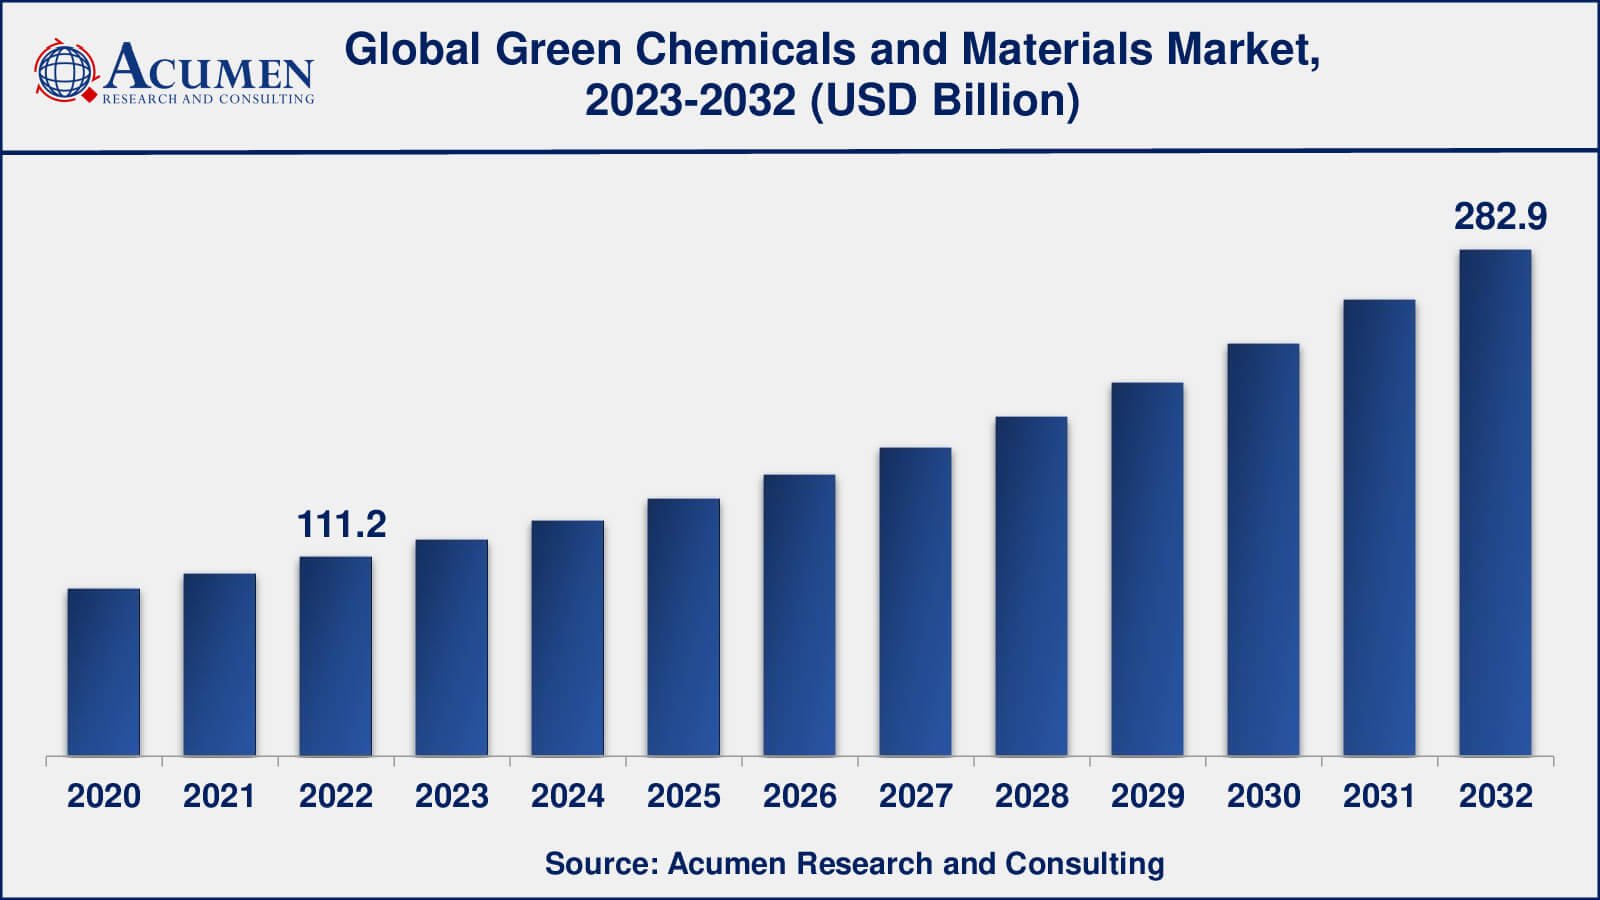 Global Green Chemicals and Materials Market Dynamics